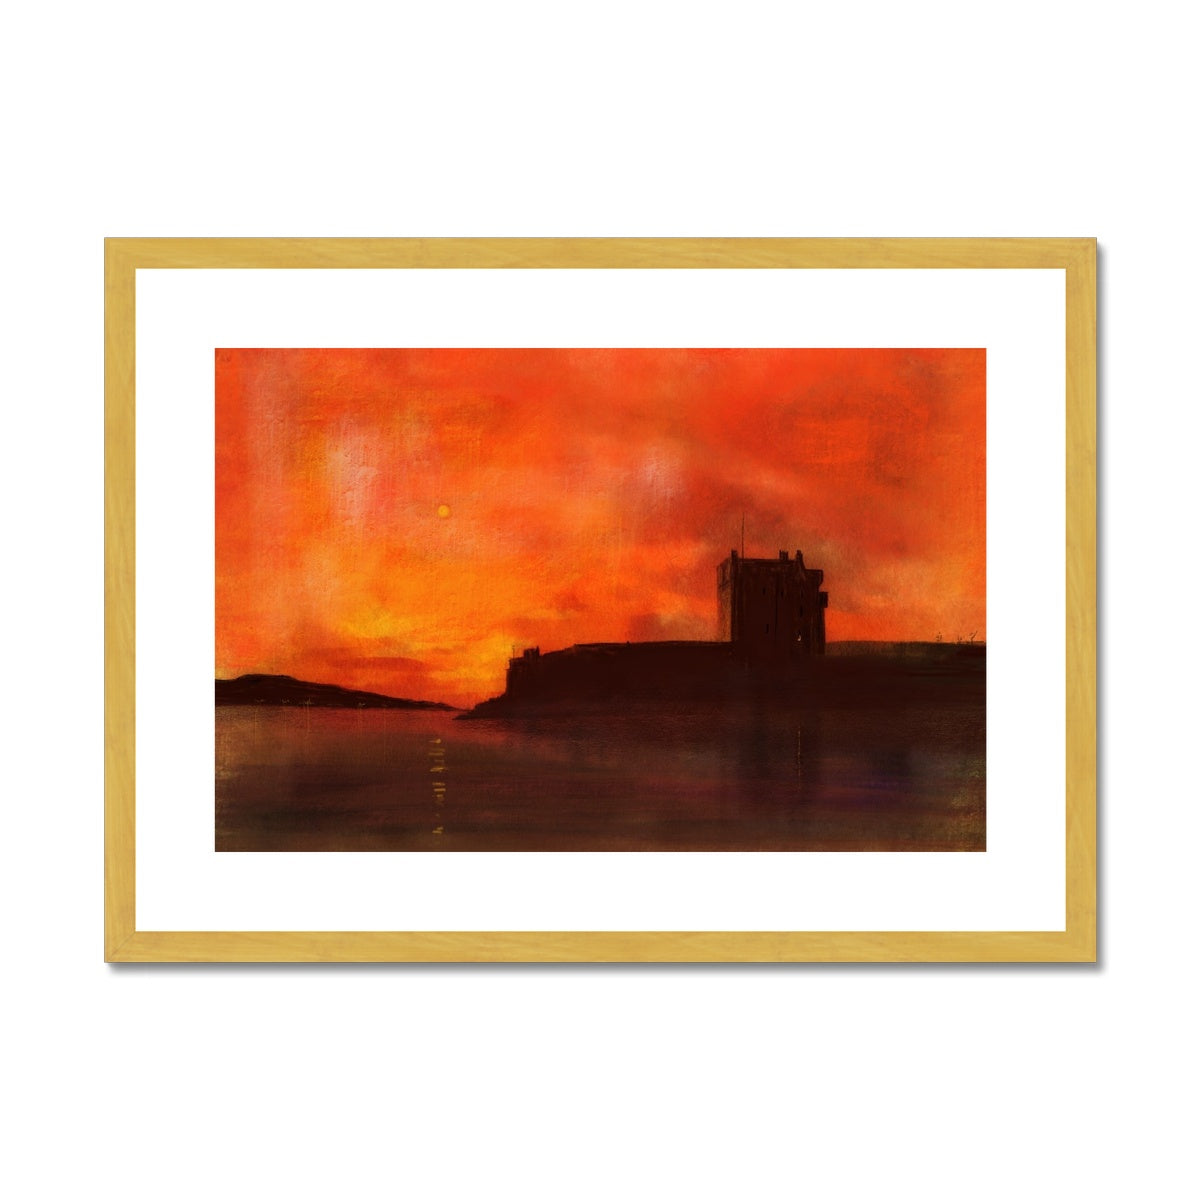 Broughty Castle Sunset Painting | Antique Framed & Mounted Prints From Scotland-Antique Framed & Mounted Prints-Historic & Iconic Scotland Art Gallery-A2 Landscape-Gold Frame-Paintings, Prints, Homeware, Art Gifts From Scotland By Scottish Artist Kevin Hunter